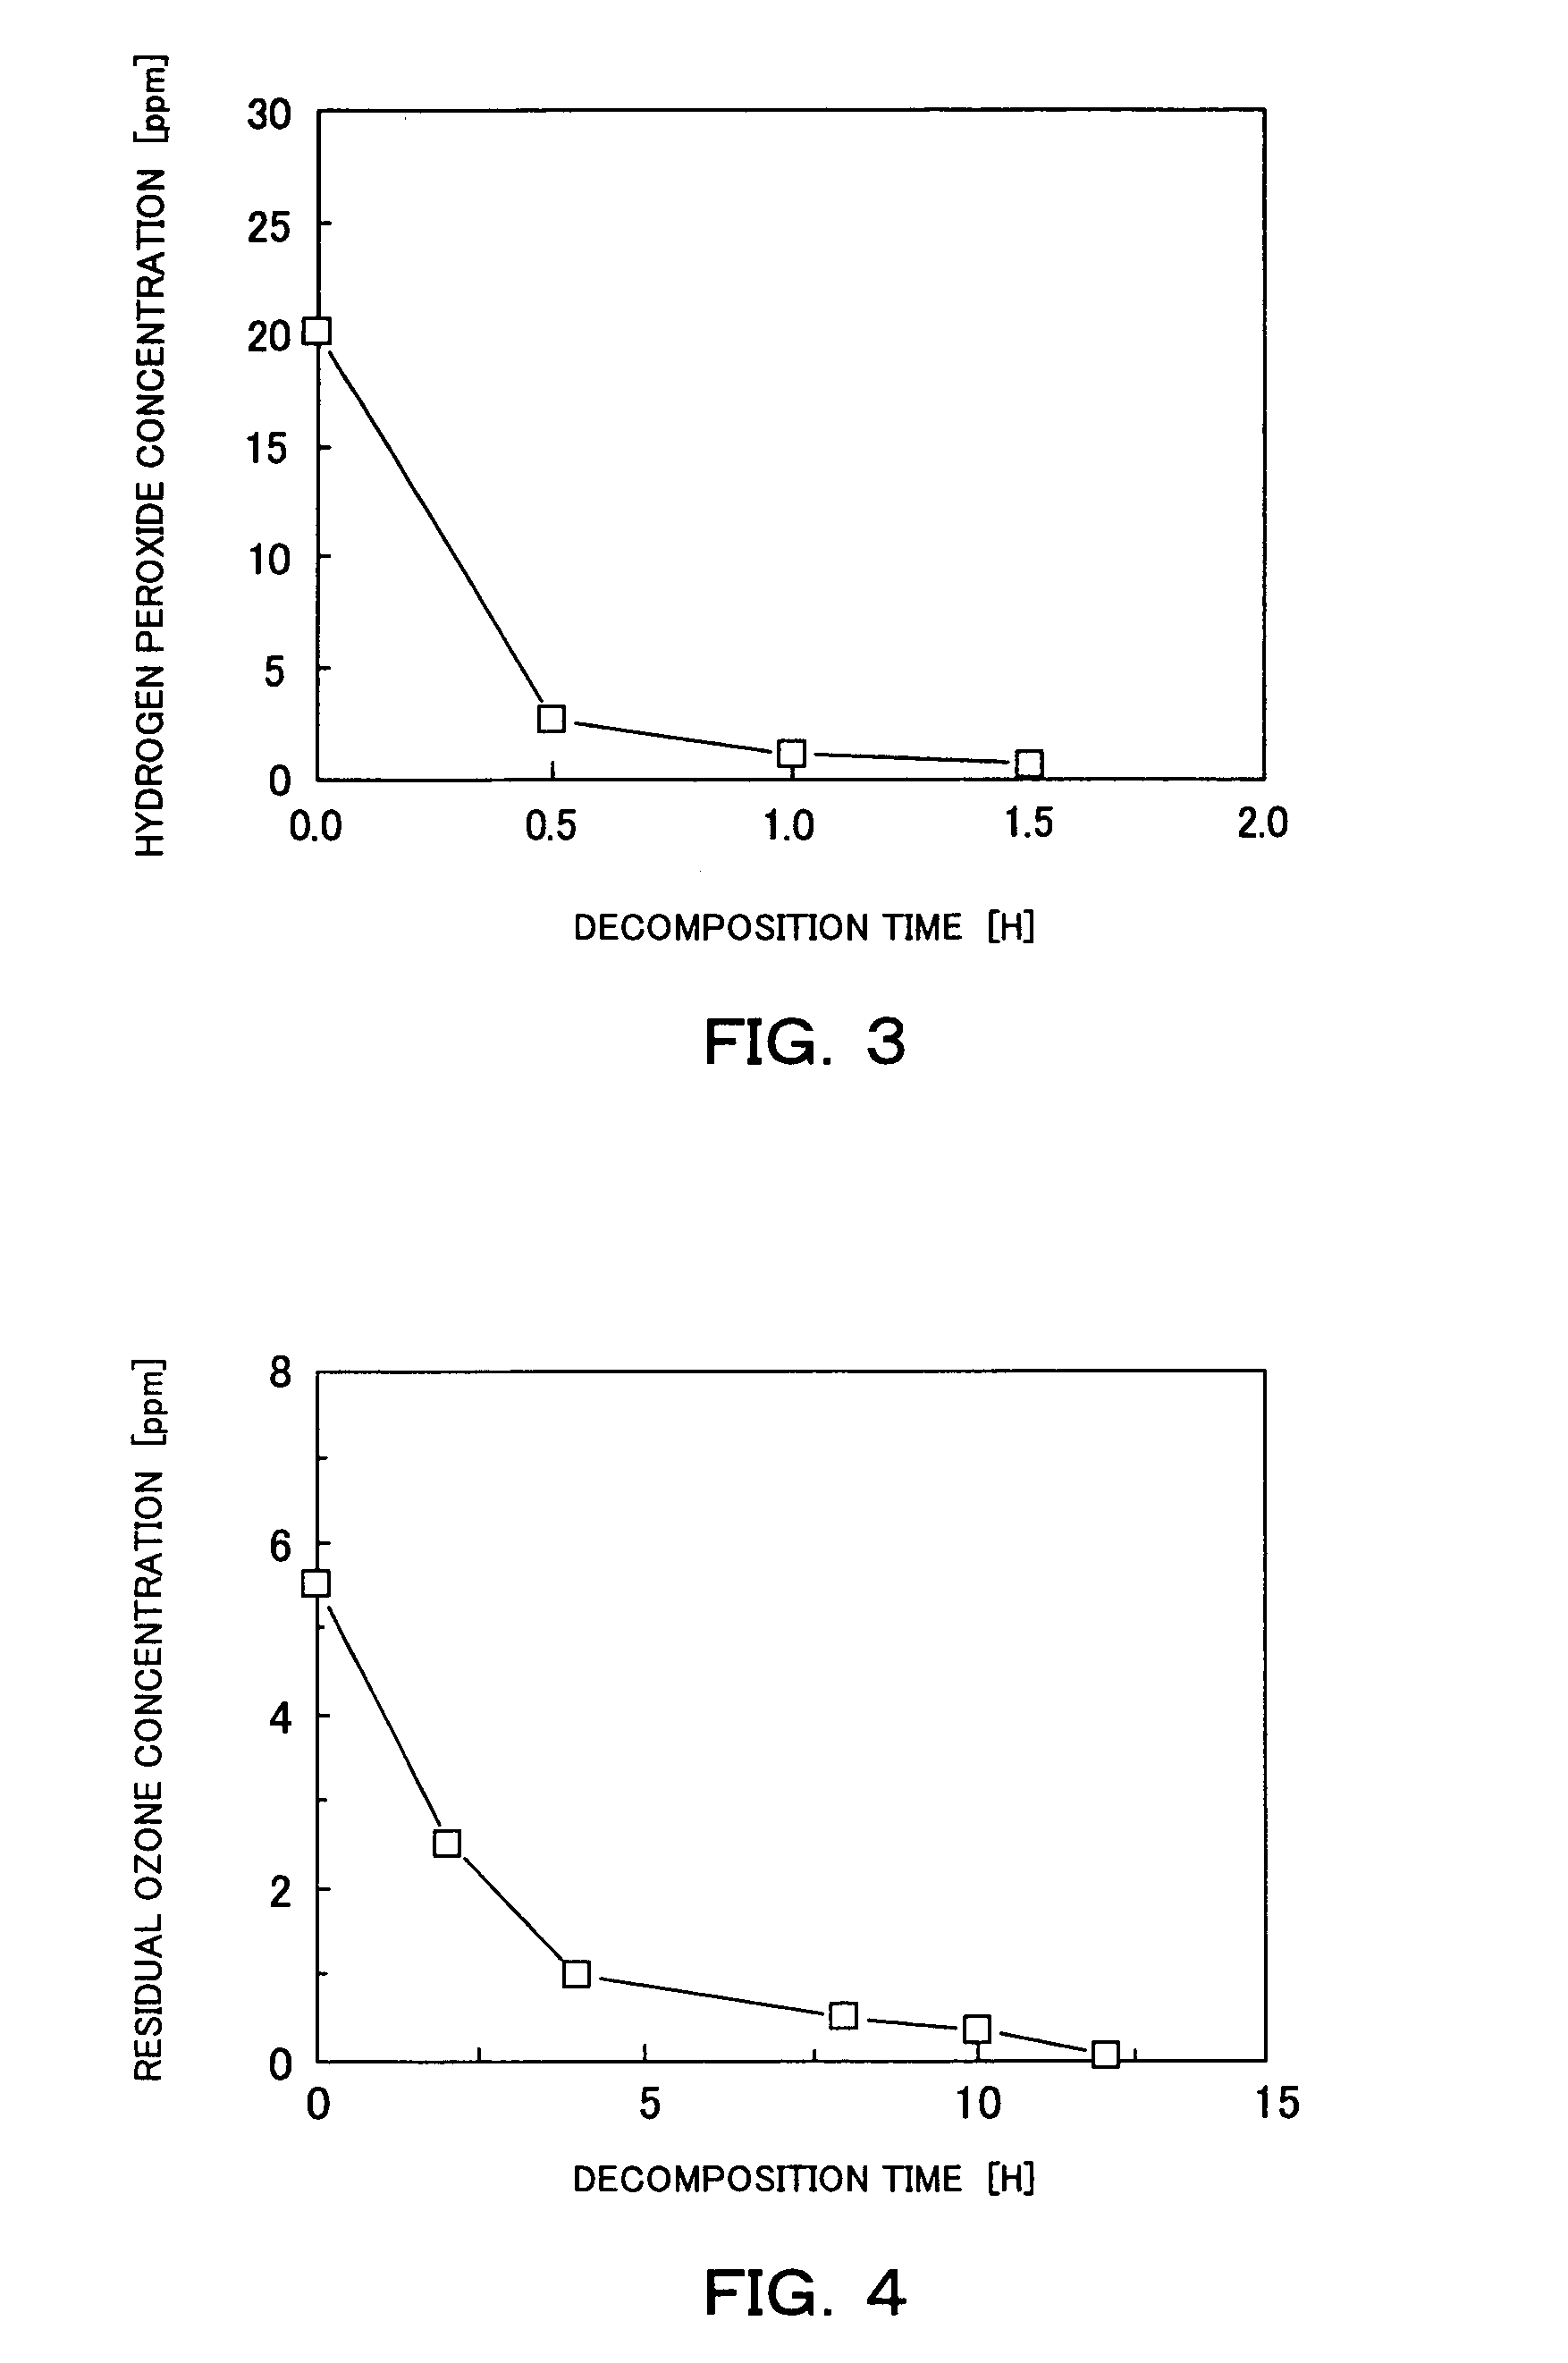 System and method for chemical decontamination of radioactive material